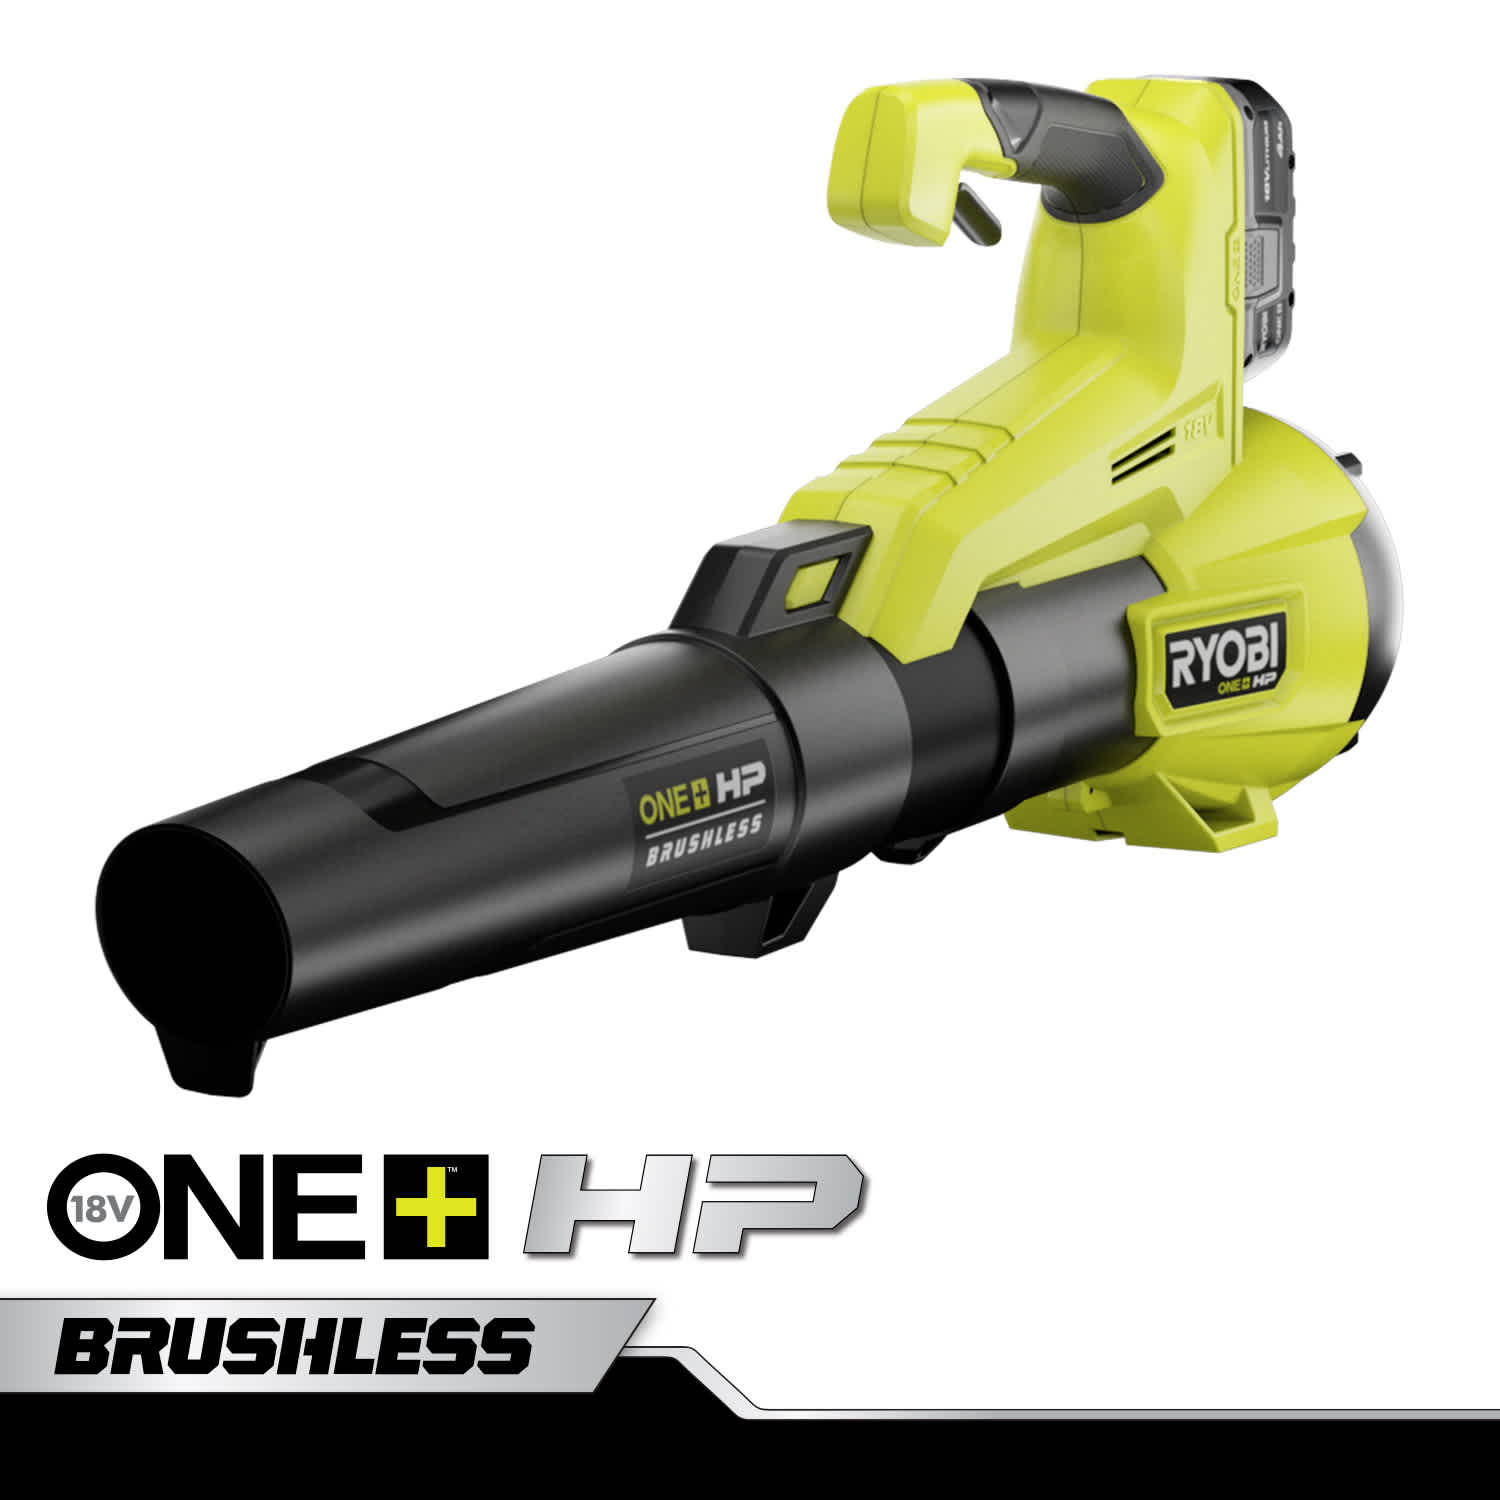 Feature Image for 18V ONE+ HP BRUSHLESS CORDLESS 110 MPH 350 CFM JET-FAN LEAF BLOWER KIT.